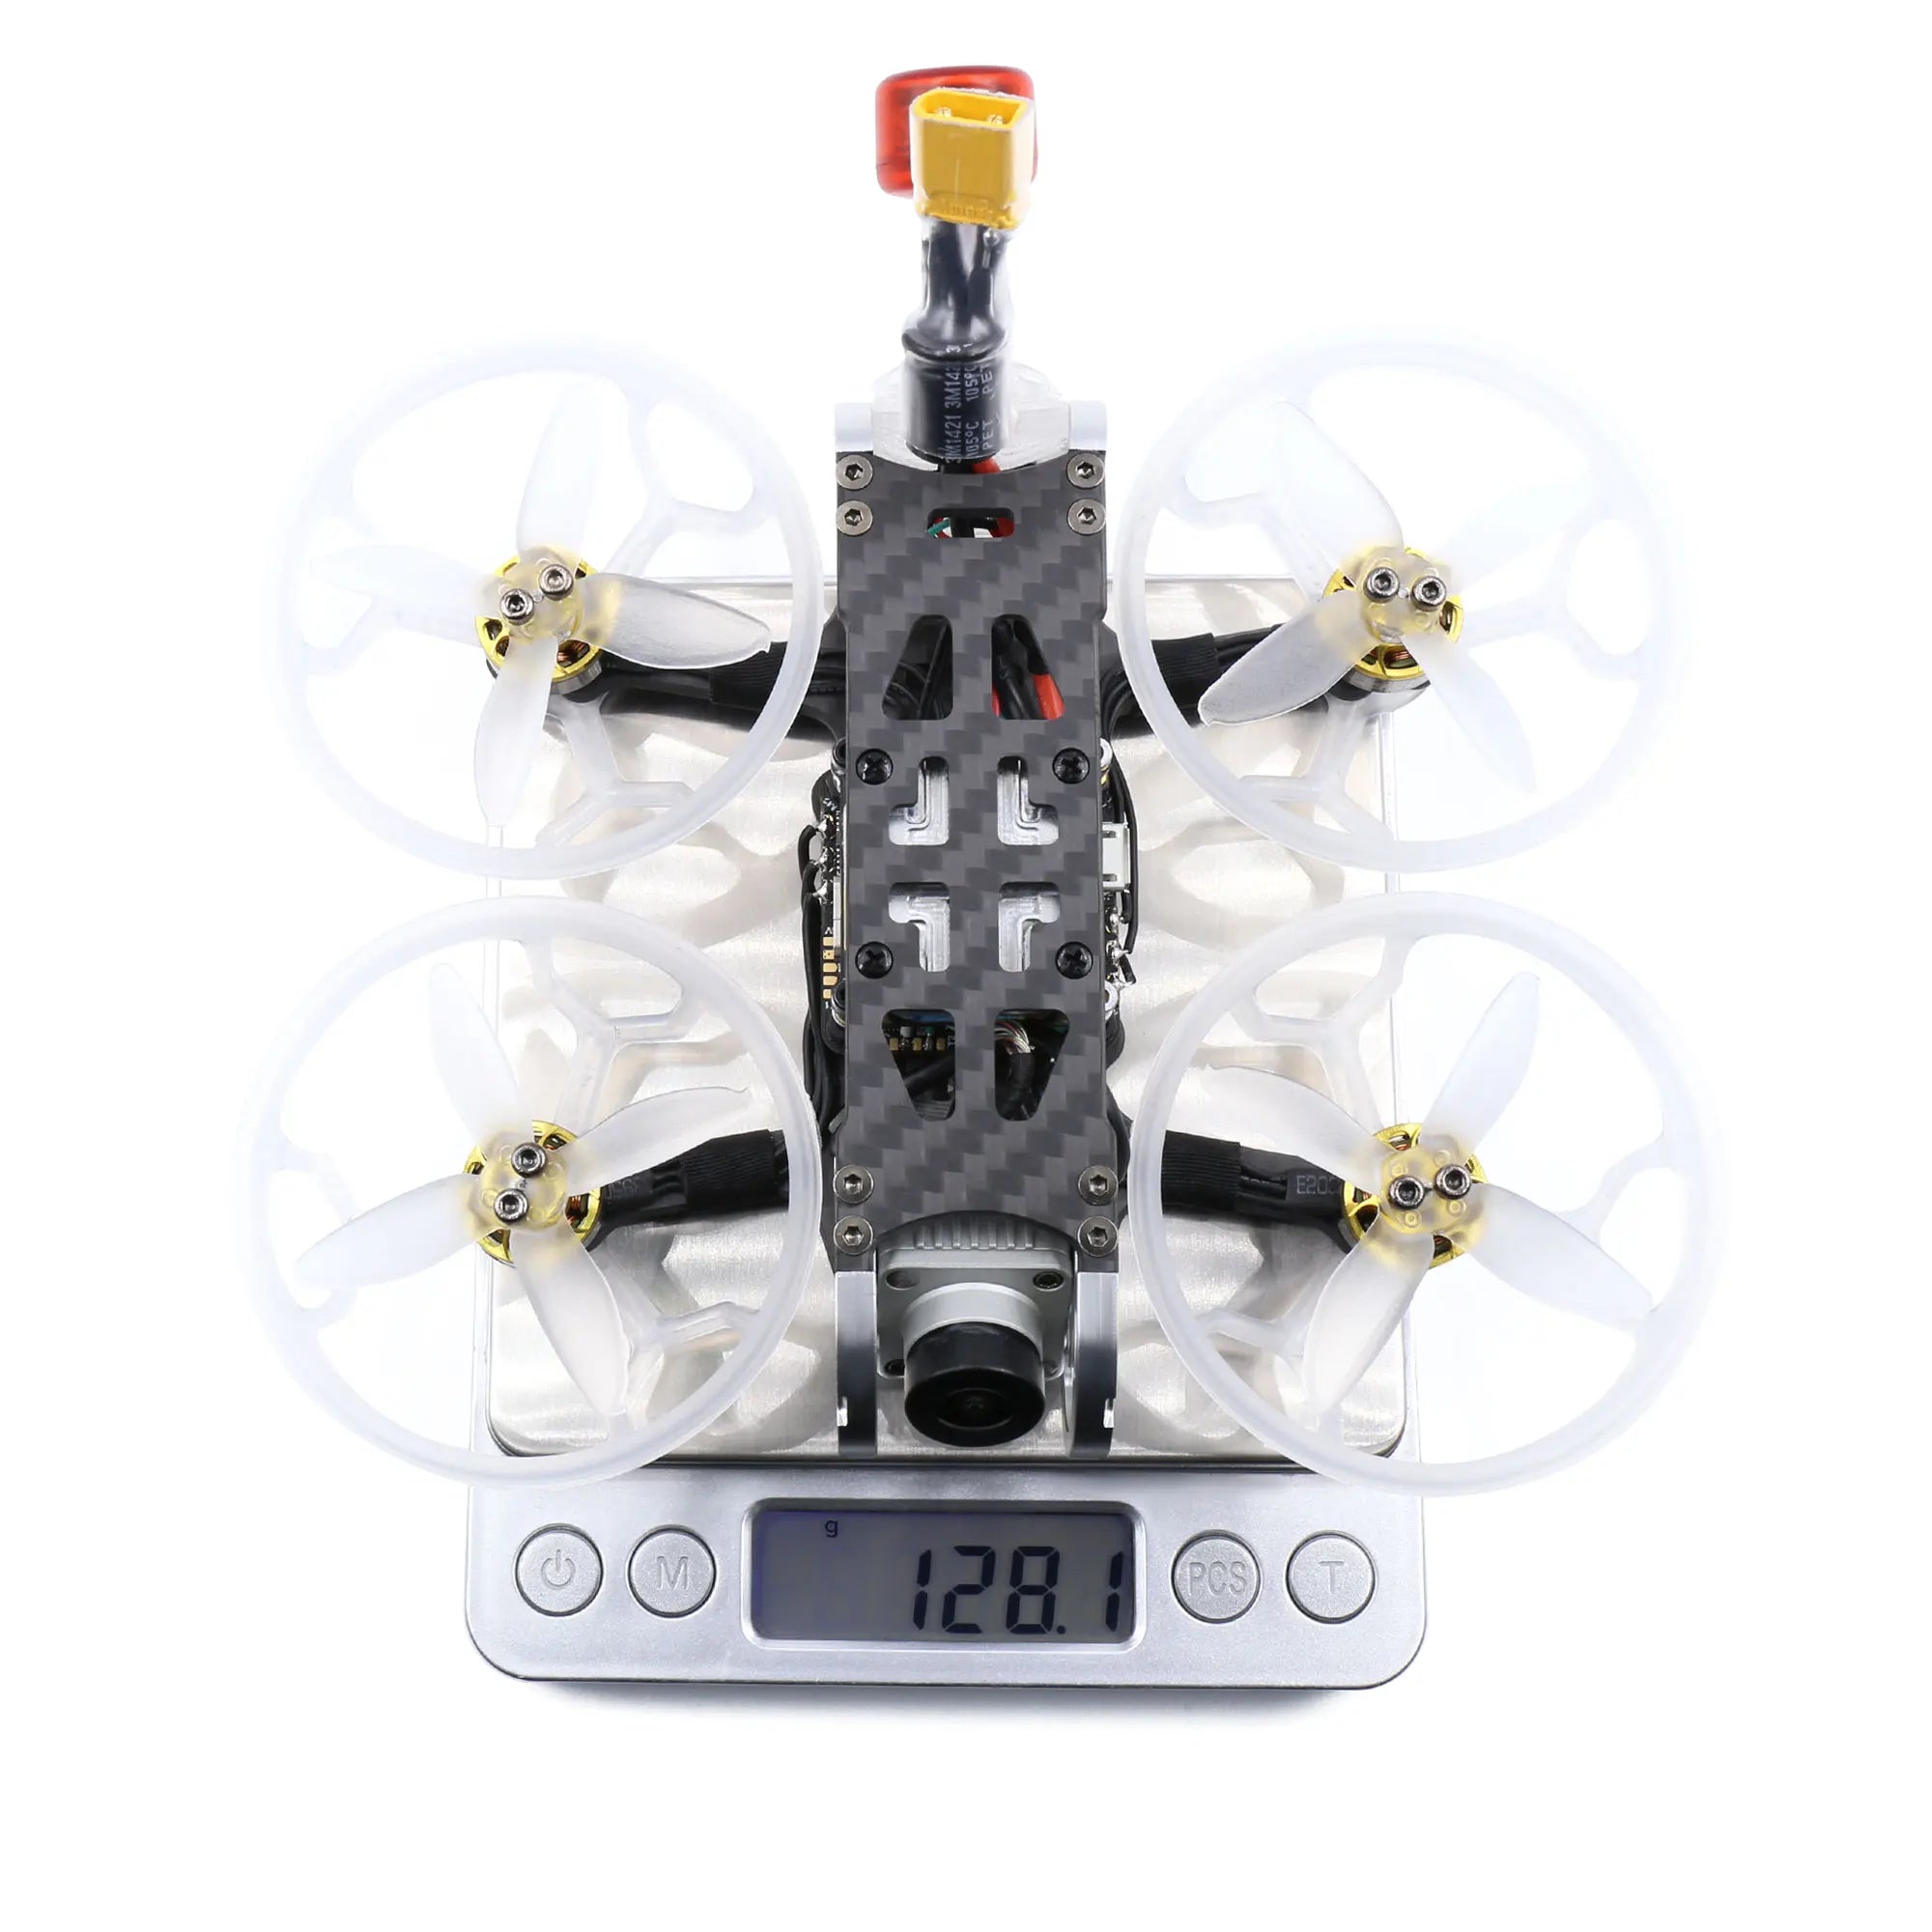 GEPRC ROCKET FPV Drone, ROCKET LITE can only record 720P video on the FPV Gog